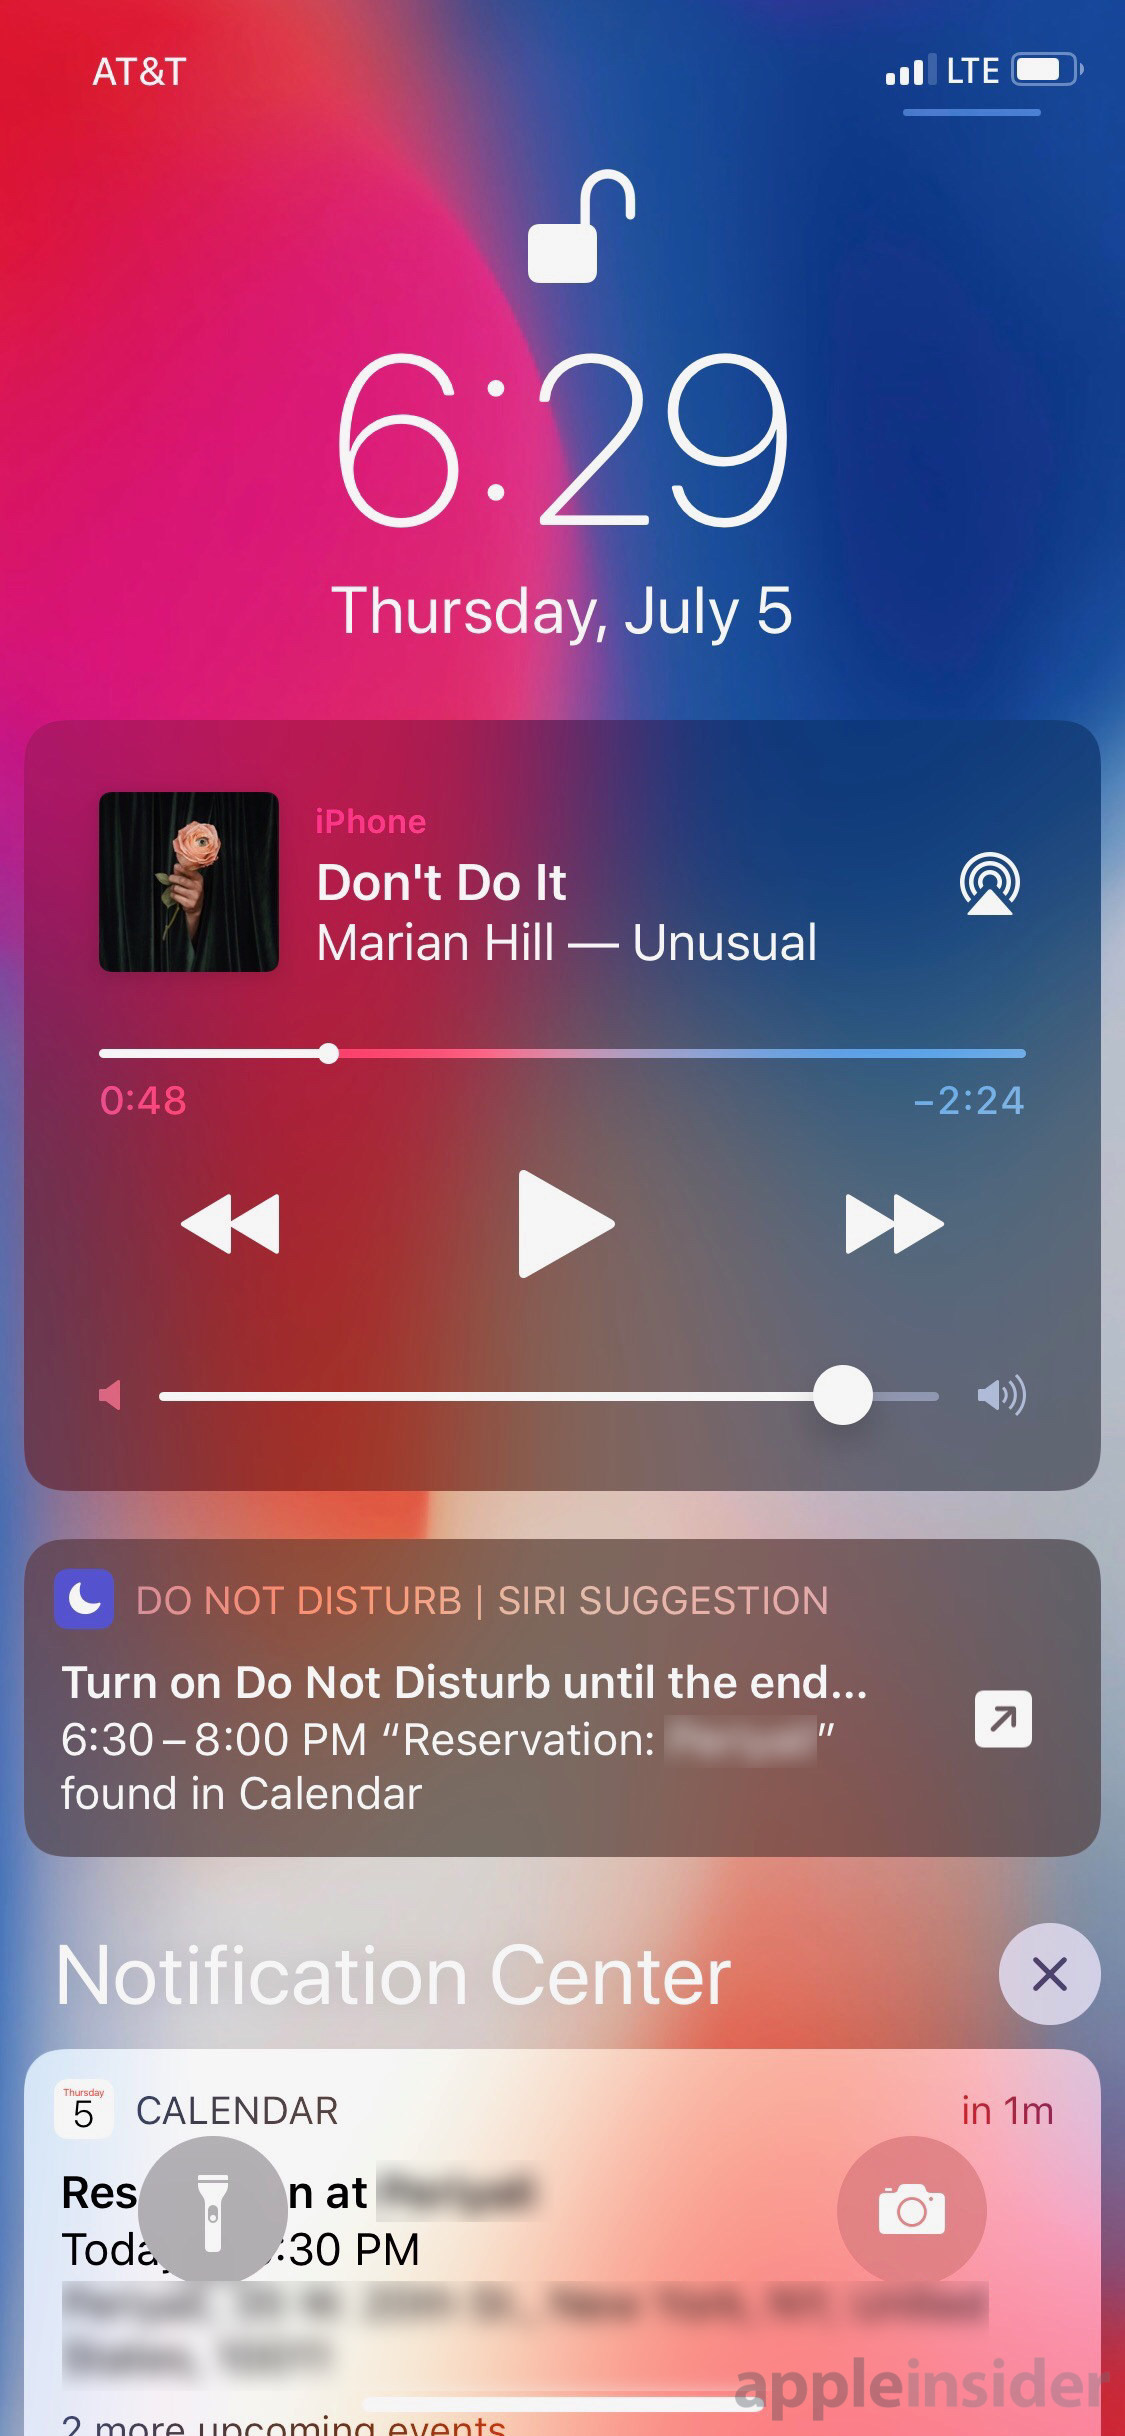 Siri Suggestion for Do Not Disturb mode